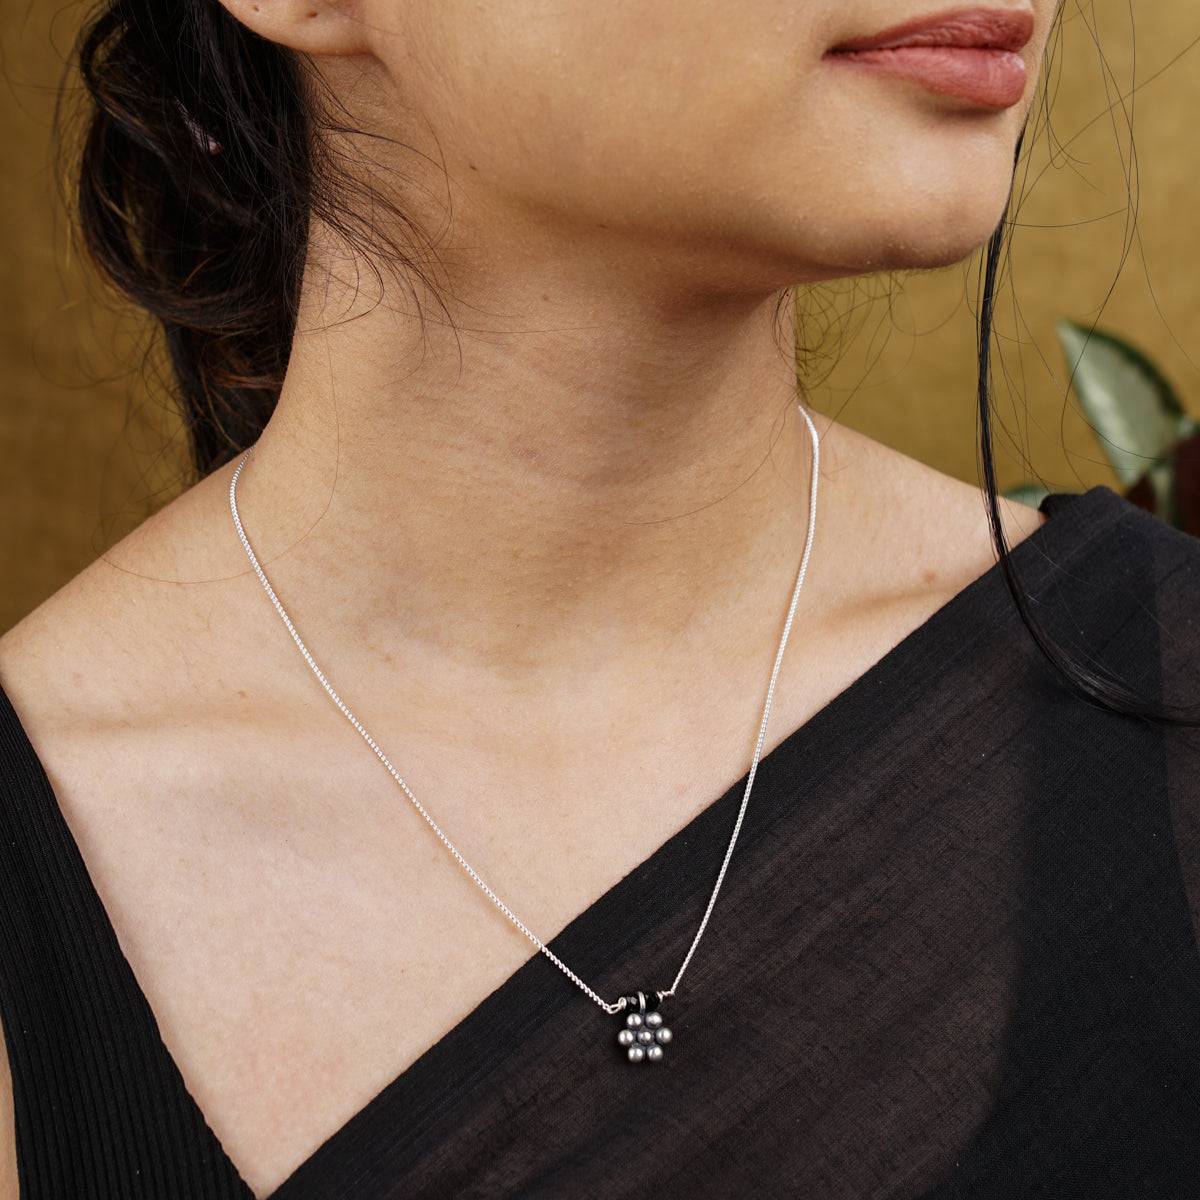 a woman wearing a black top and a silver necklace